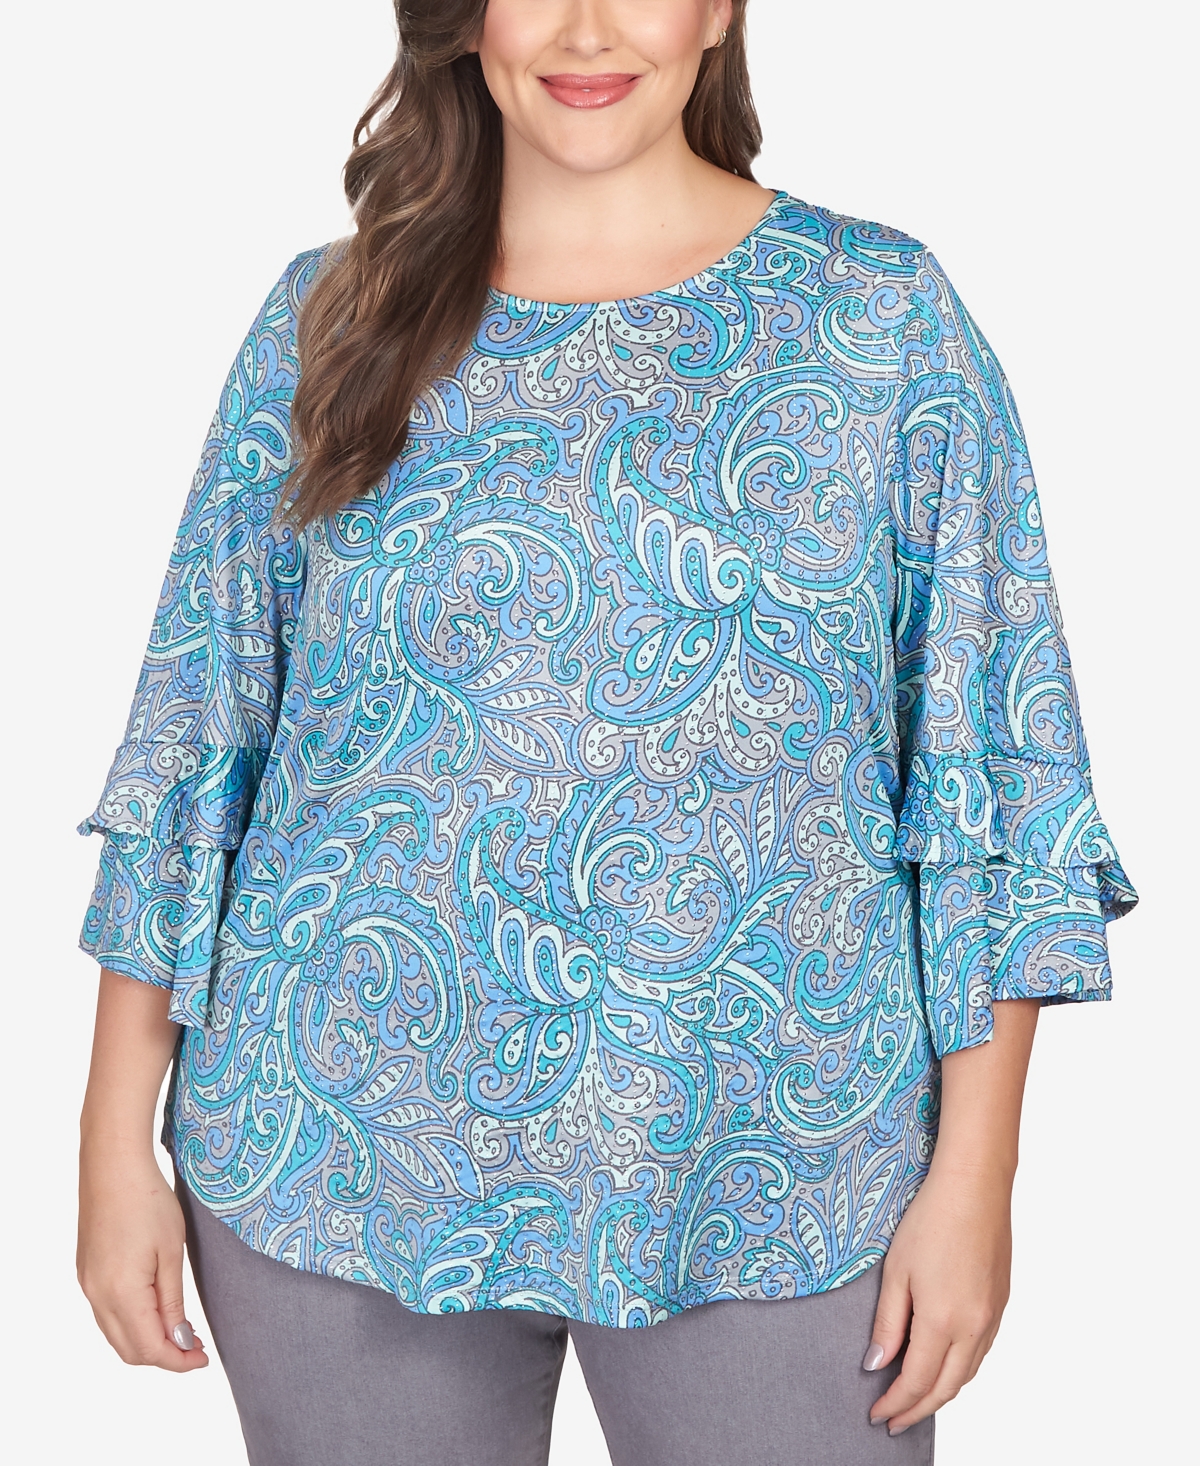 Plus Size Paisley Dew Drop Knit Top with Ruffle Sleeves - Lipstick Multi